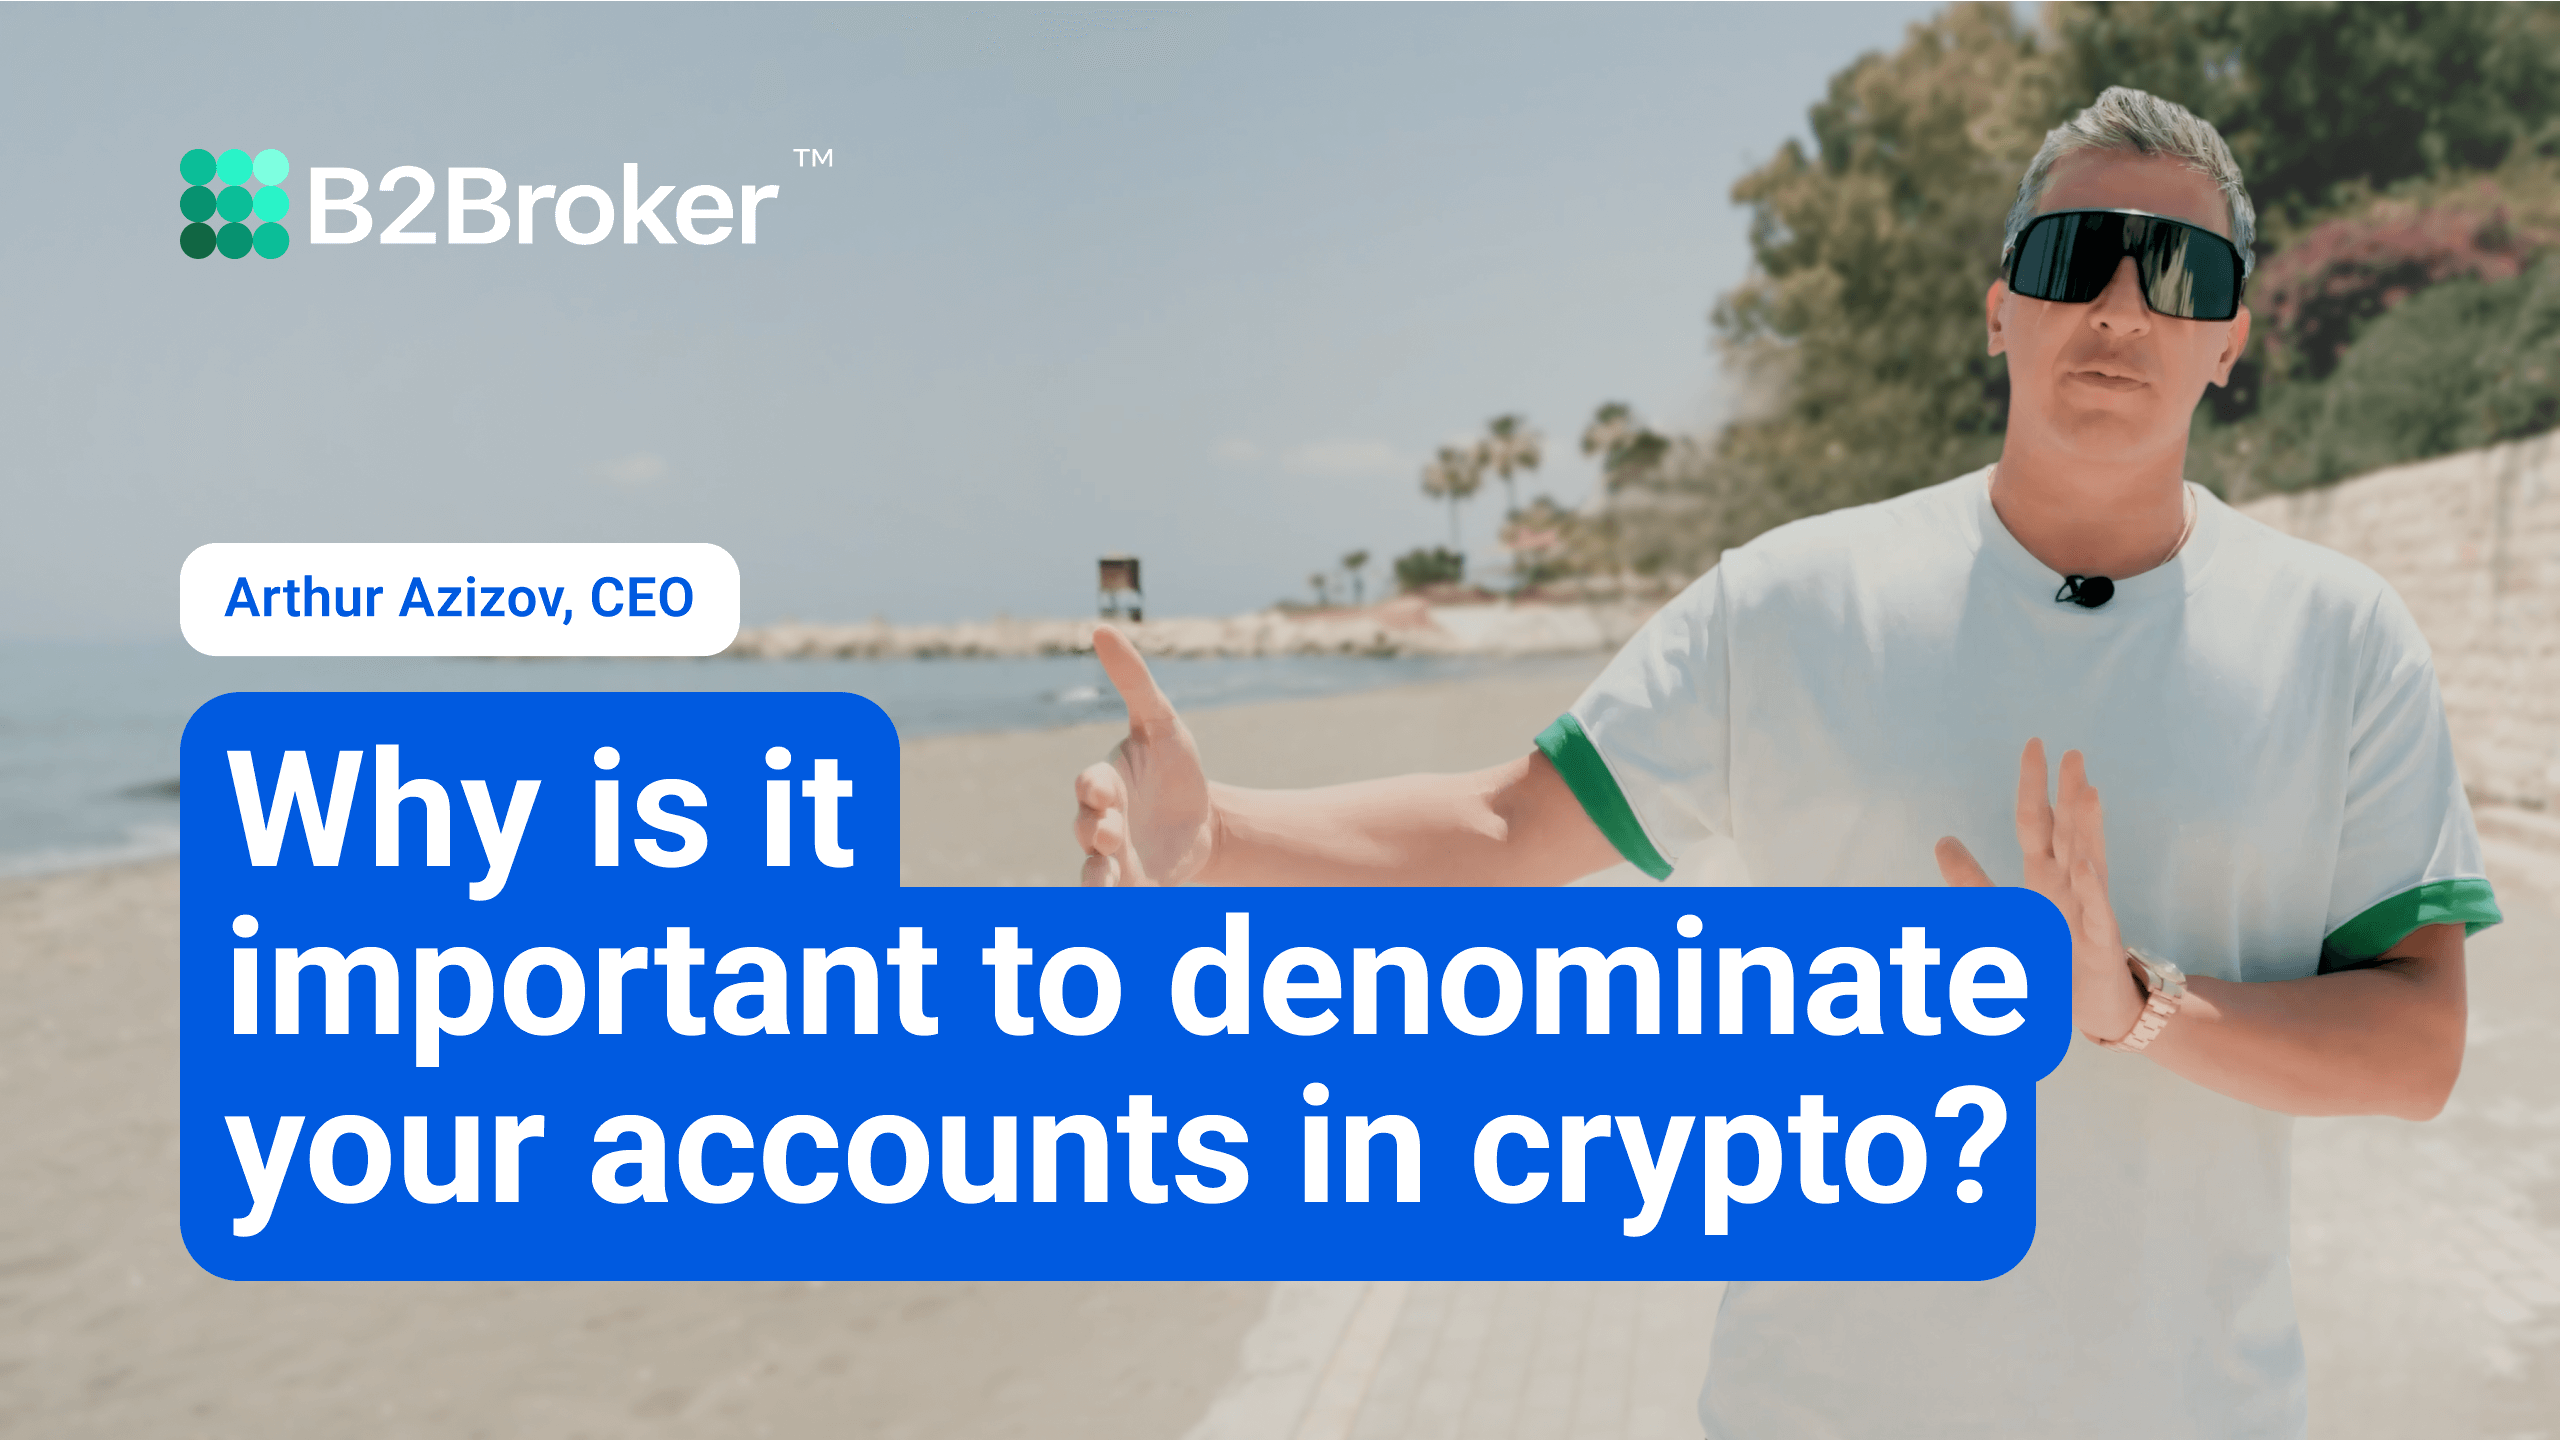 B2Broker Q&A | Crypto Denomination: What You Need To Know